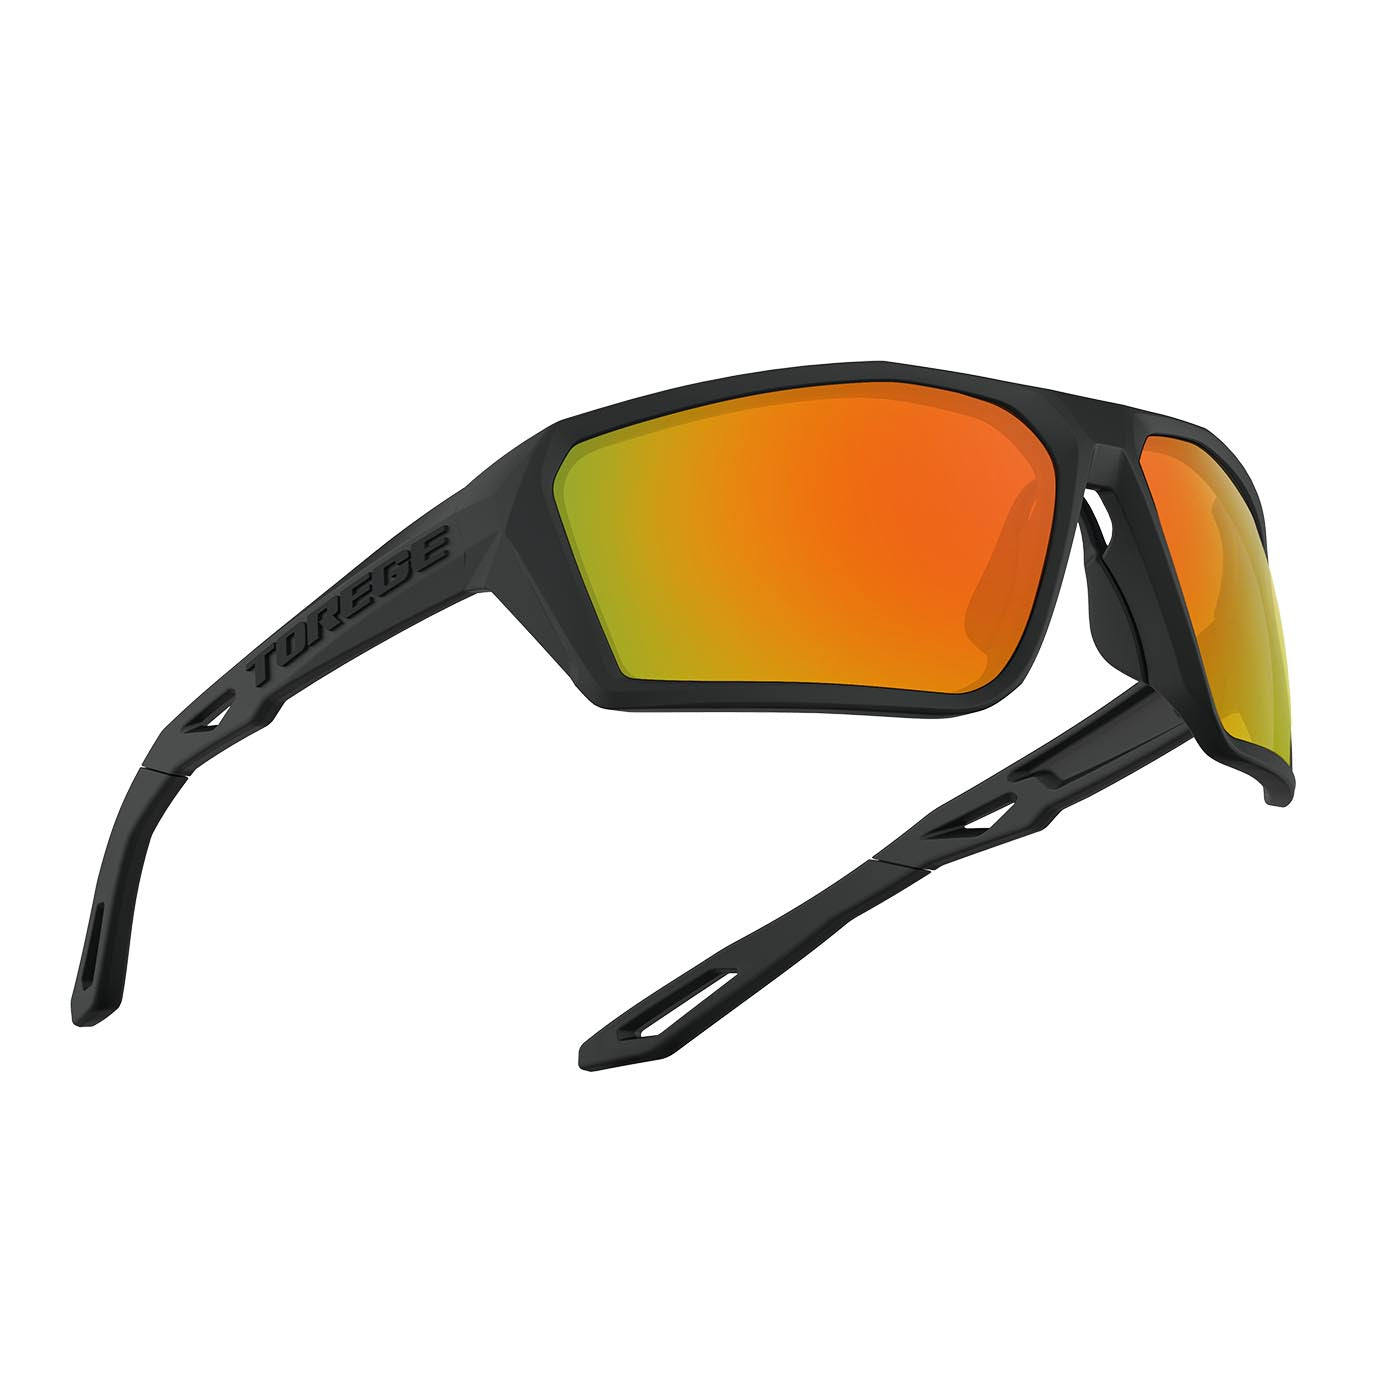 TOREGE Sports Polarized unisex Sunglasses for Fishing Cycling Running Golfing Sunglasses Durable Lens, Adult Unisex, Size: One size, Red